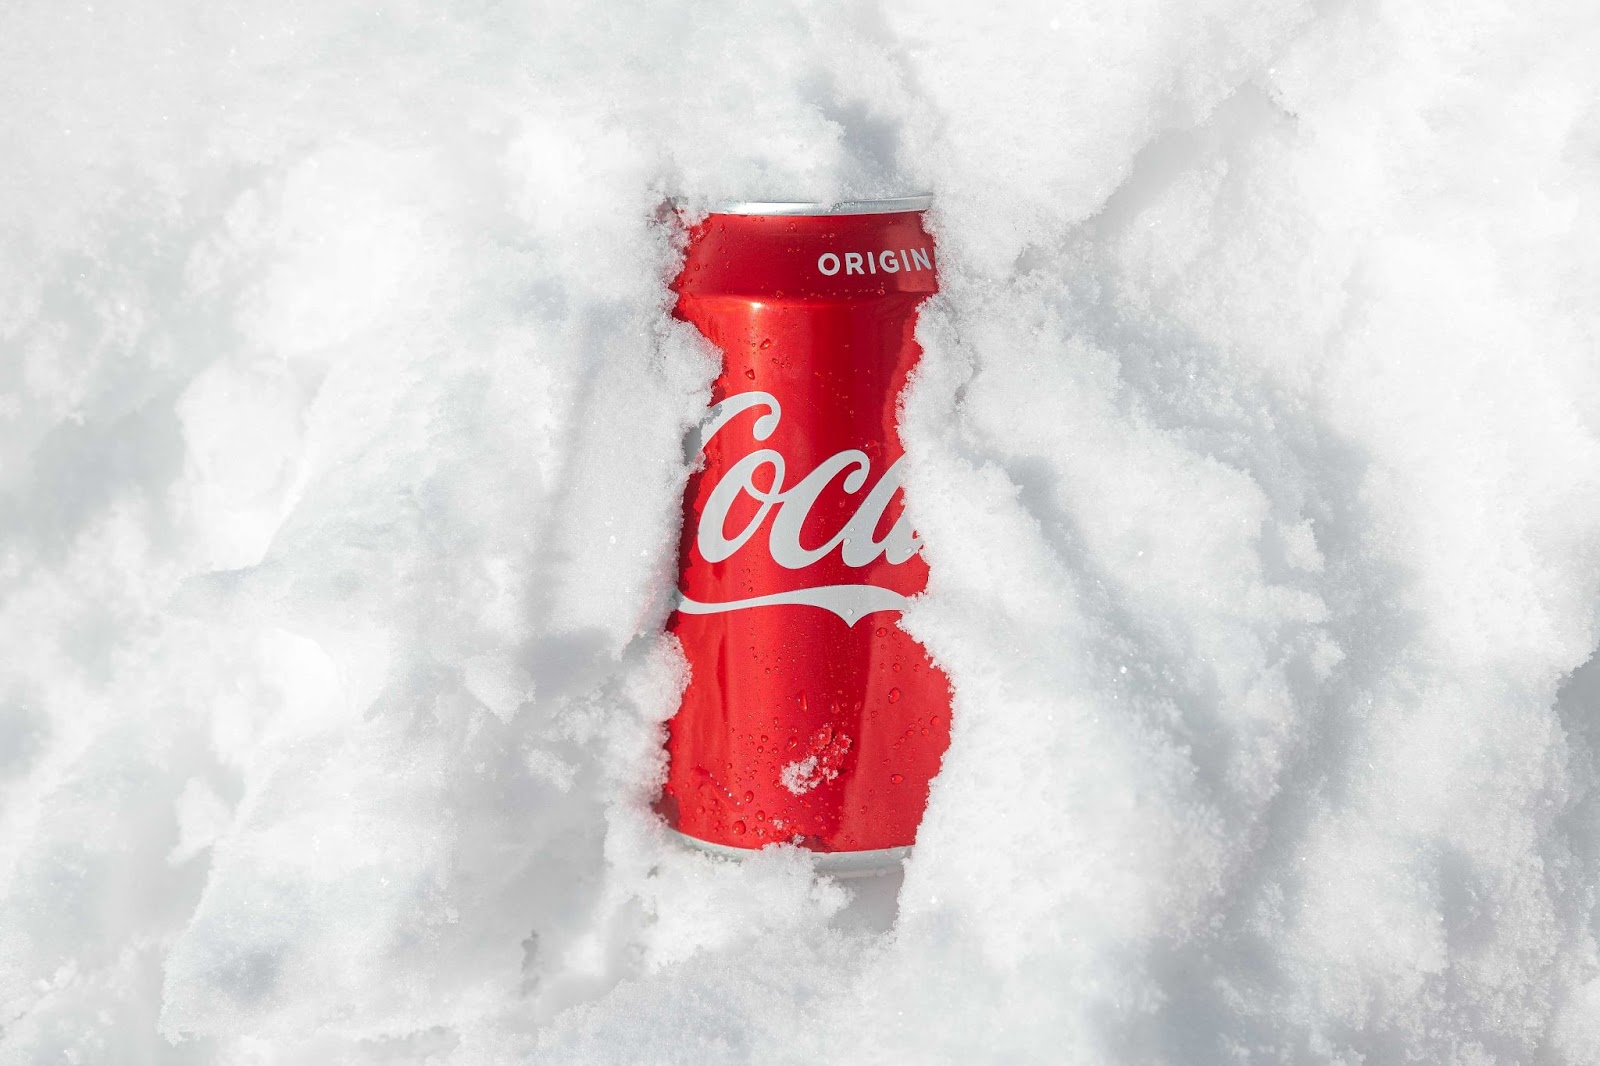 An image of a can of Coca-Cola buried in snow—only Coca is visible.